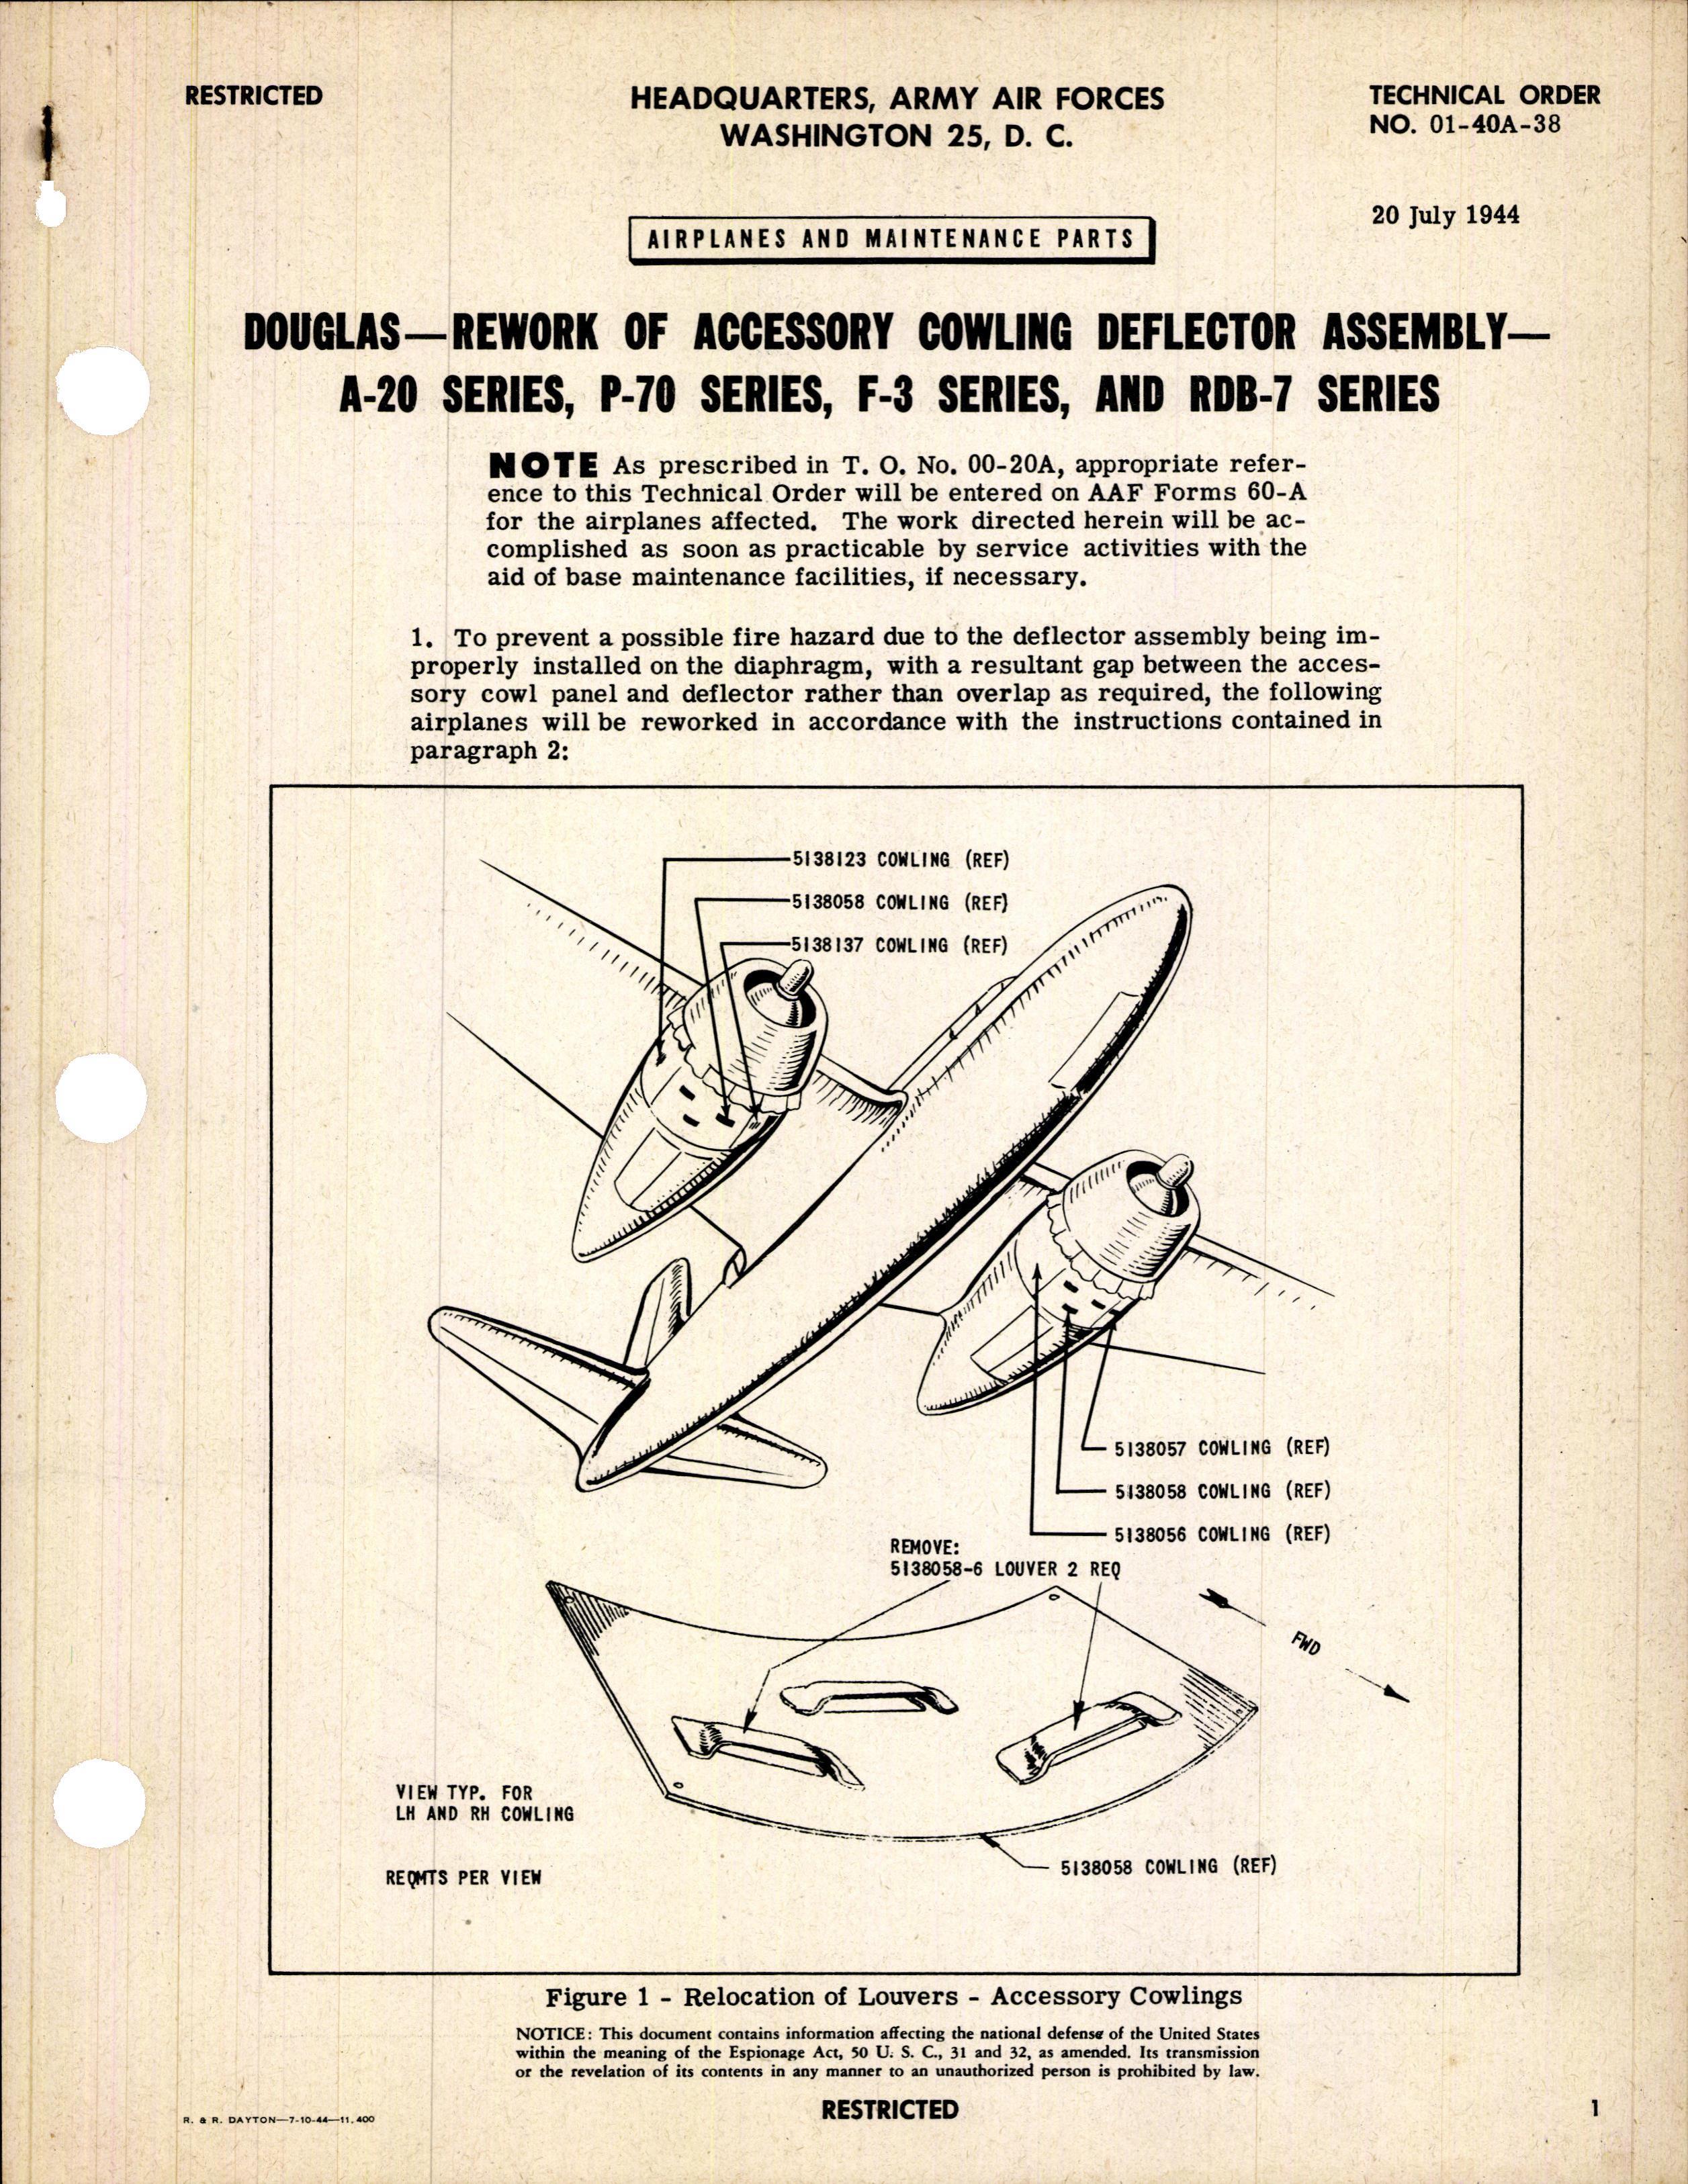 Sample page 1 from AirCorps Library document: Rework of Accessory Cowling Deflector Assembly for A-20, P-70, F-3, and RDB-7 Series